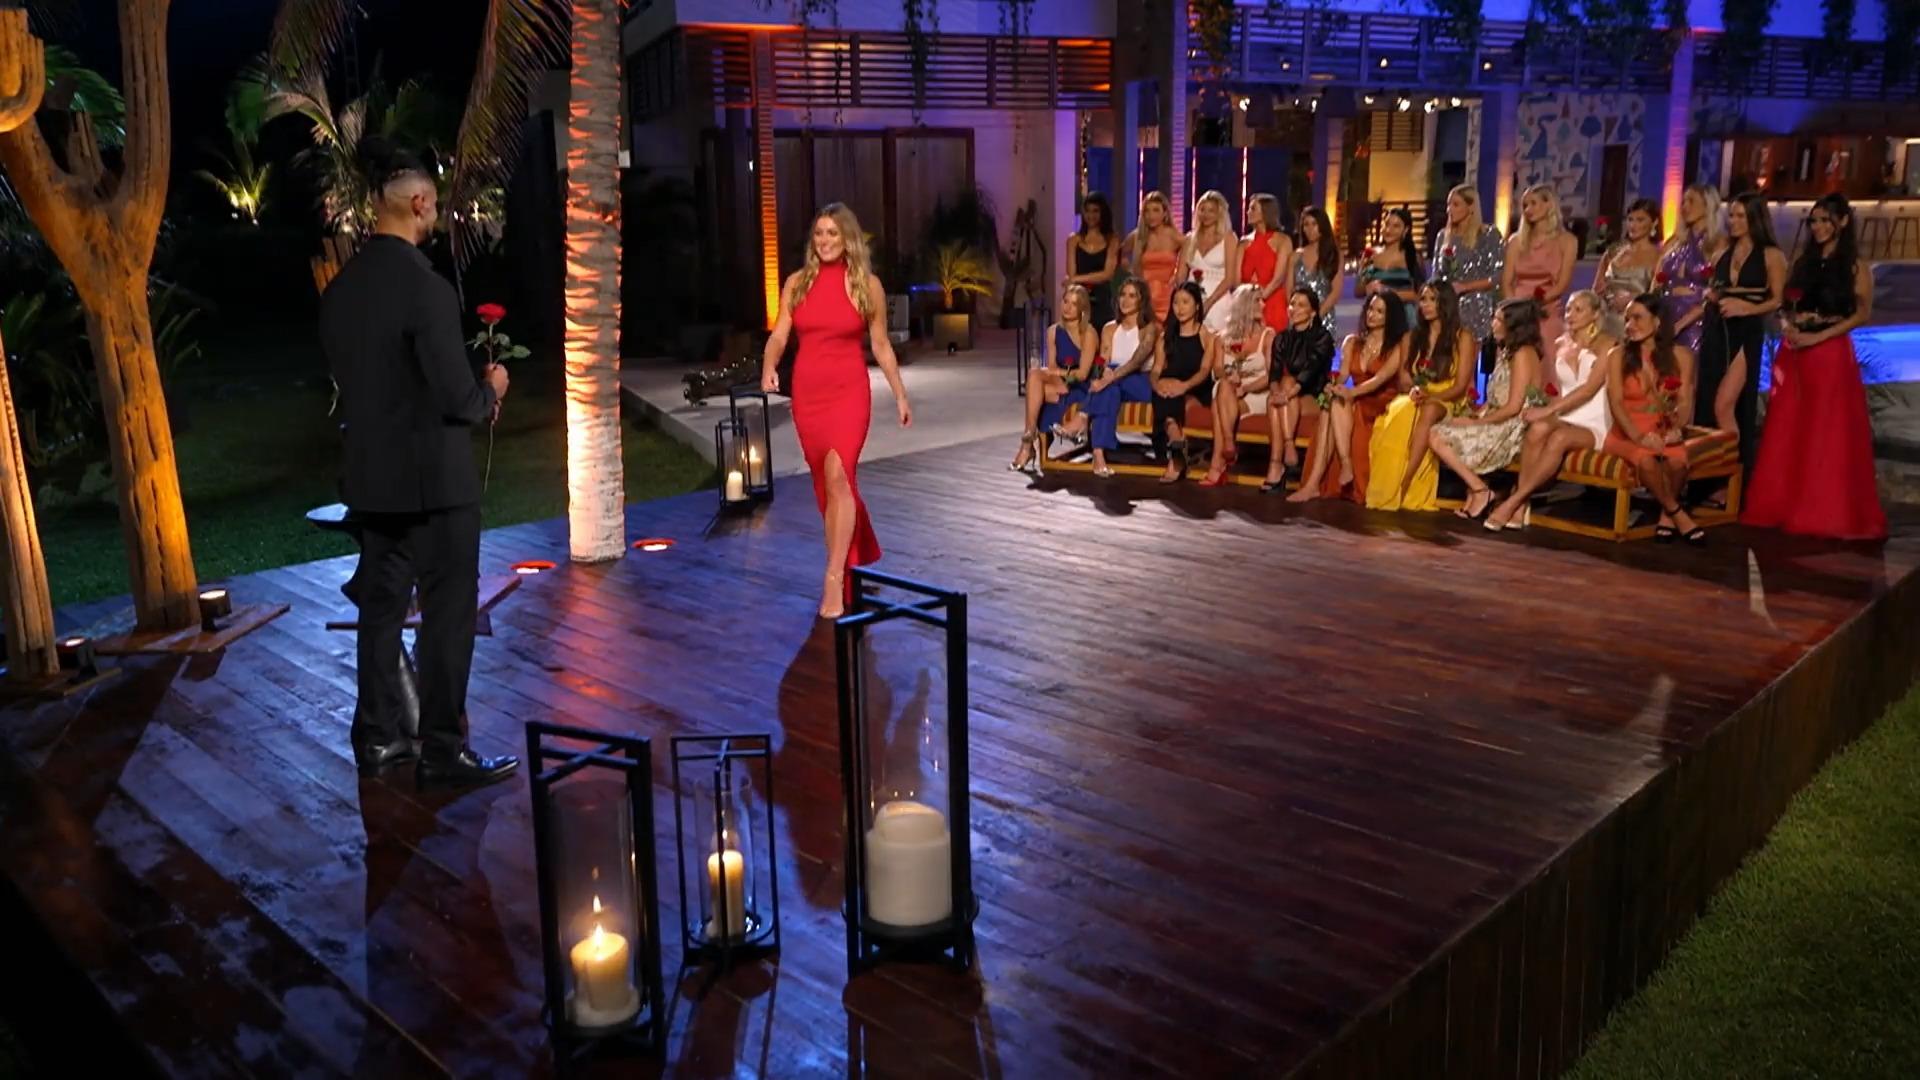 These 20 bachelor candidates were able to convince David Erste Rose, check!